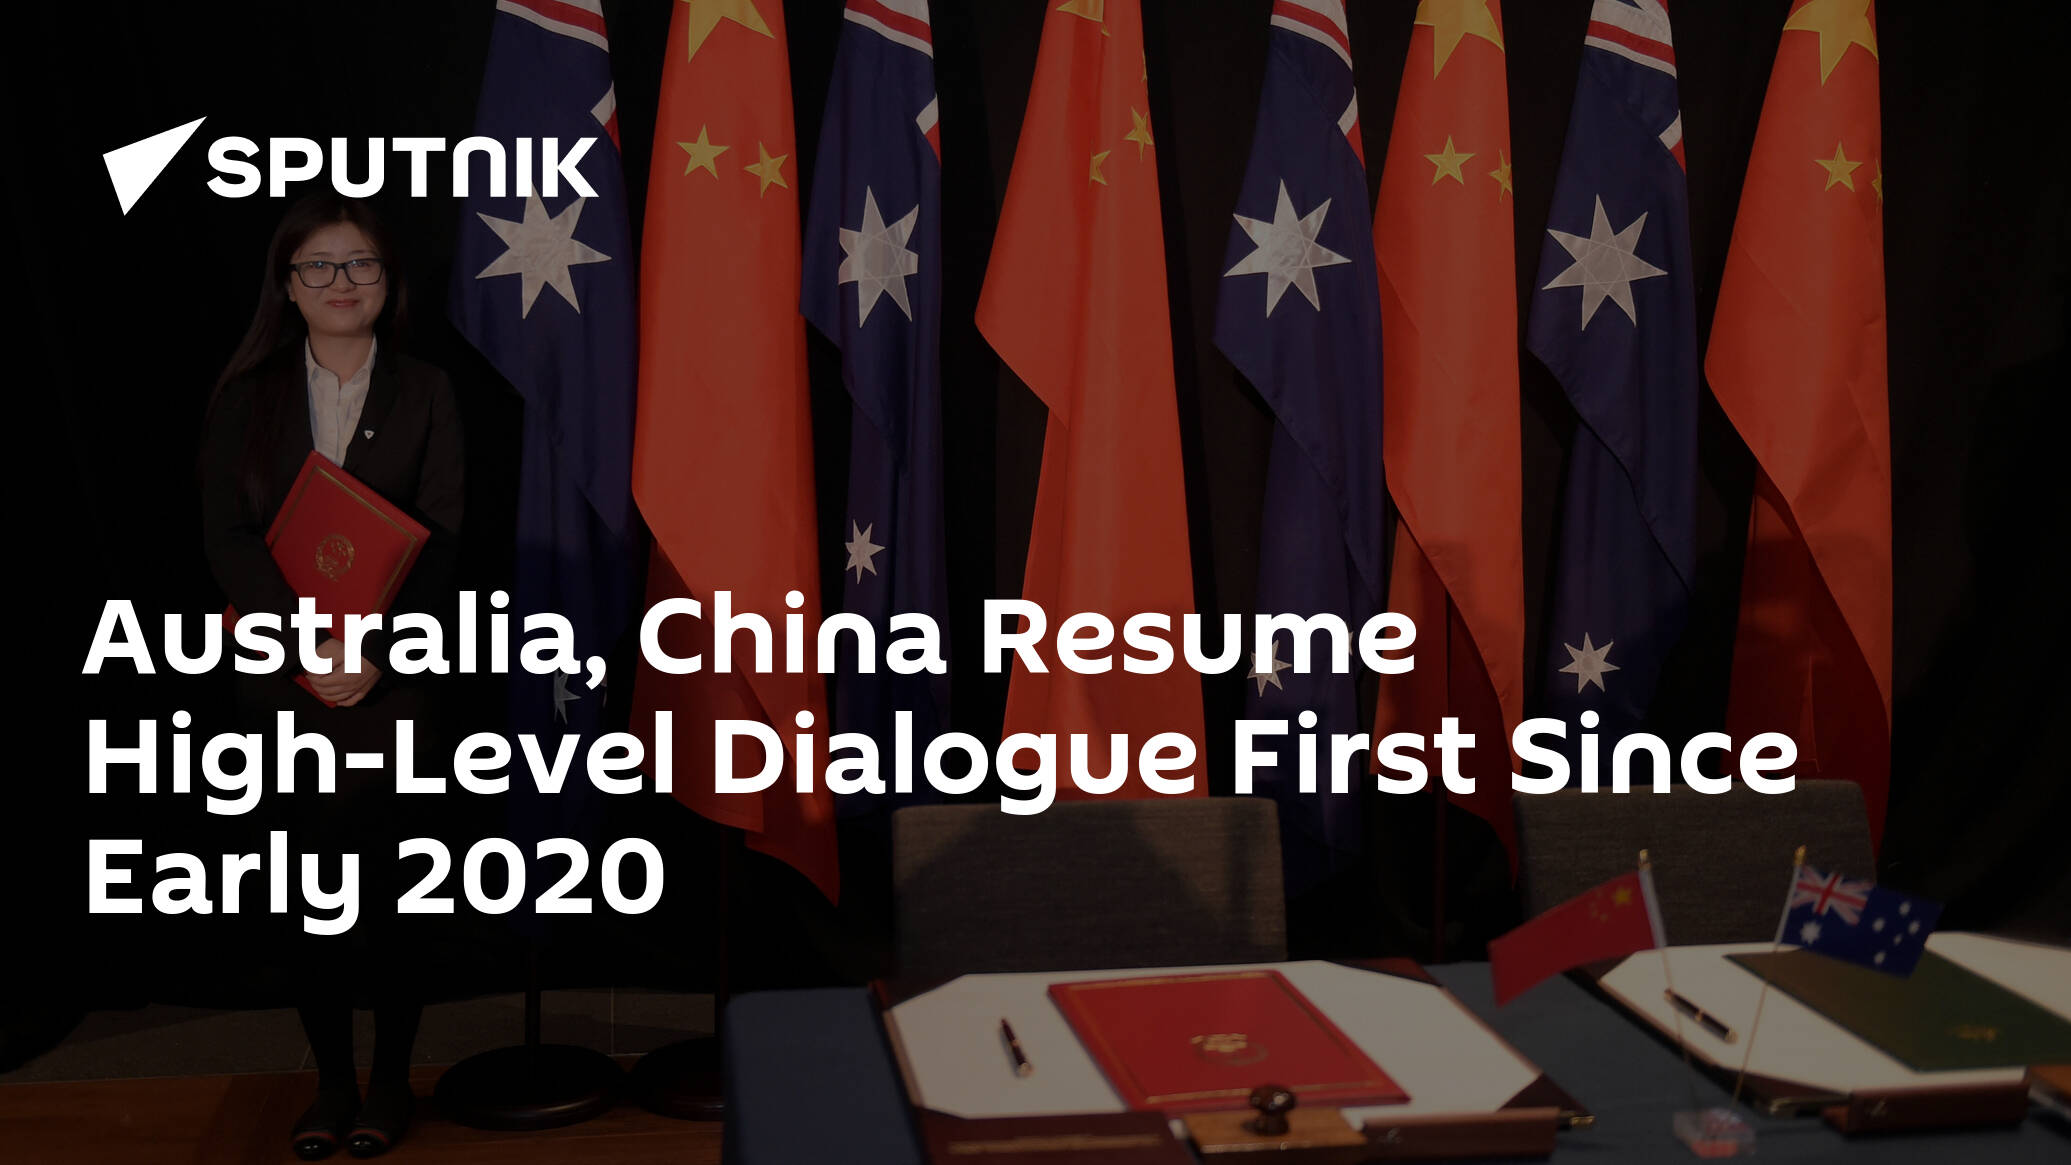 Australia, China Resume High-Level Dialogue First Since Early 2020